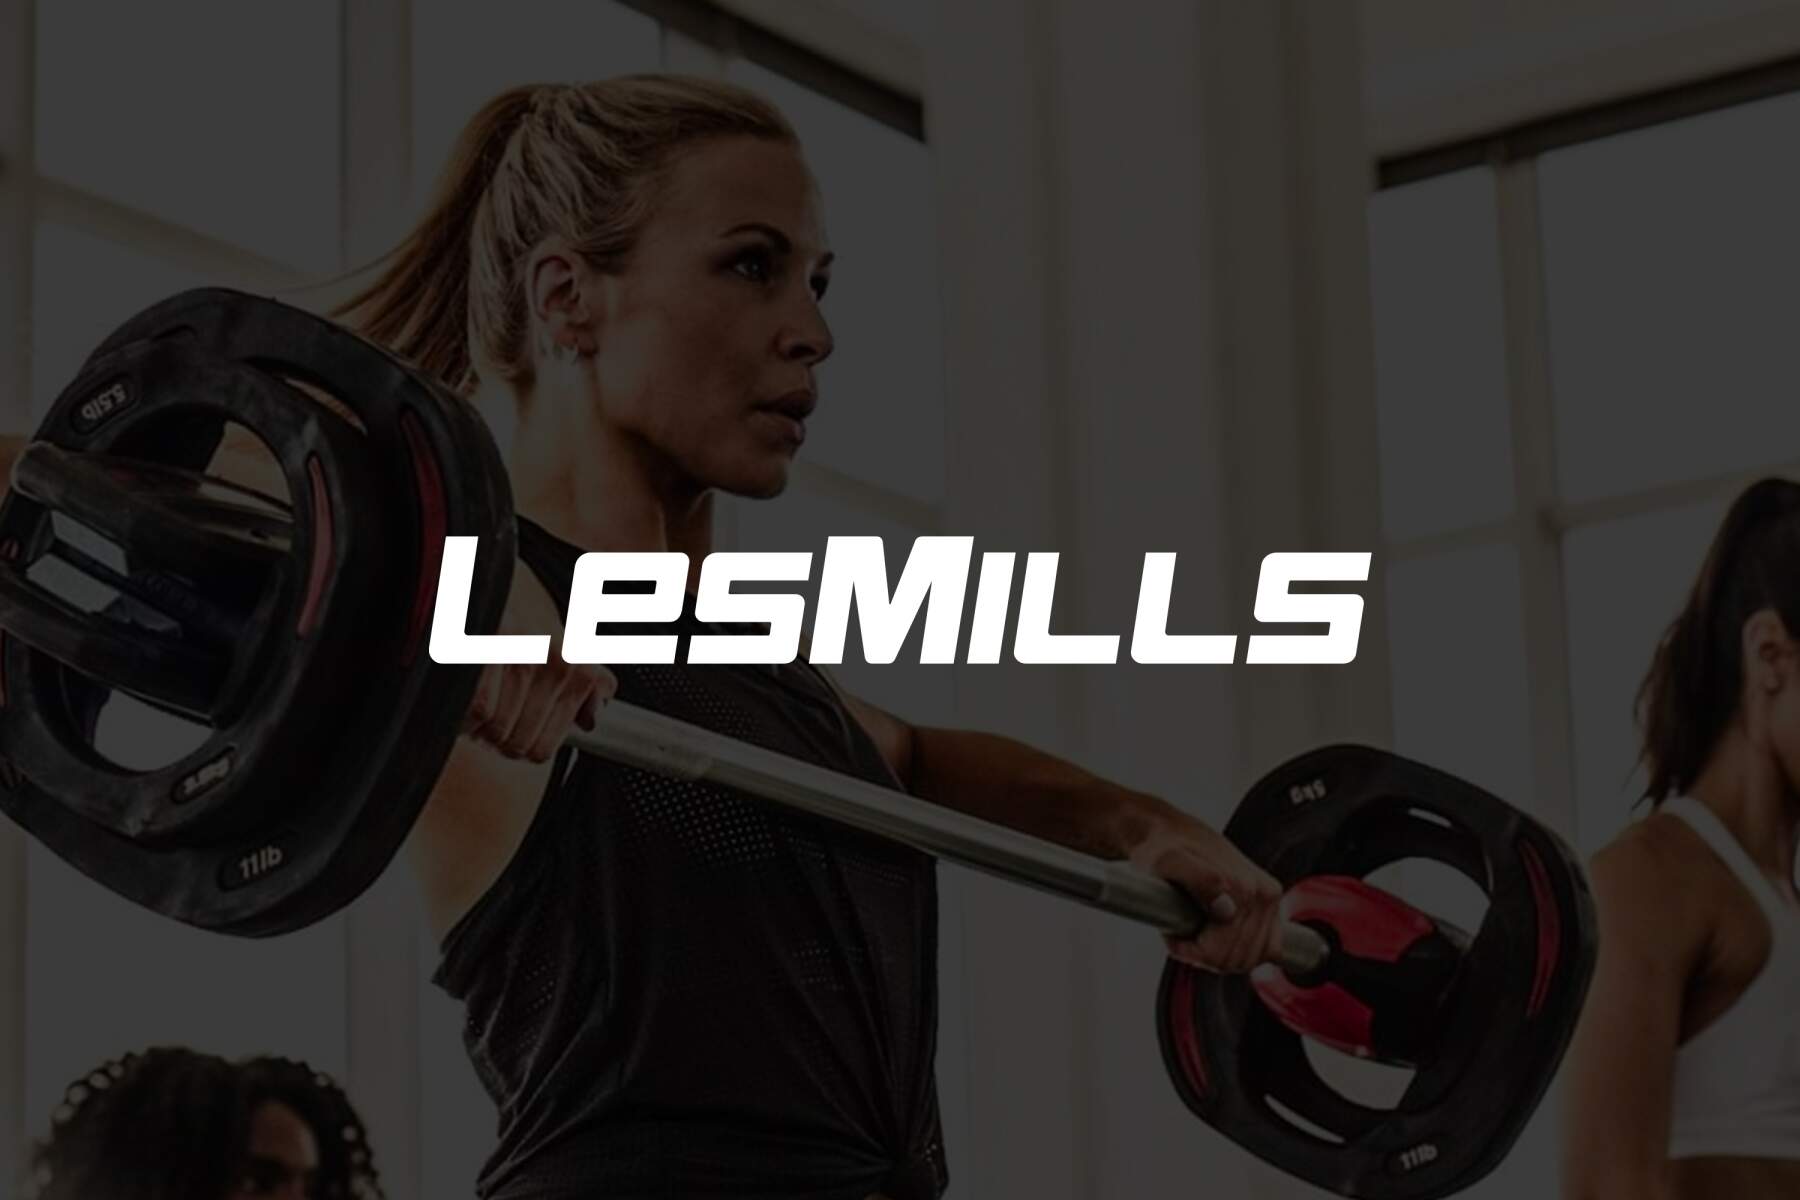 Les Mills and group fitness